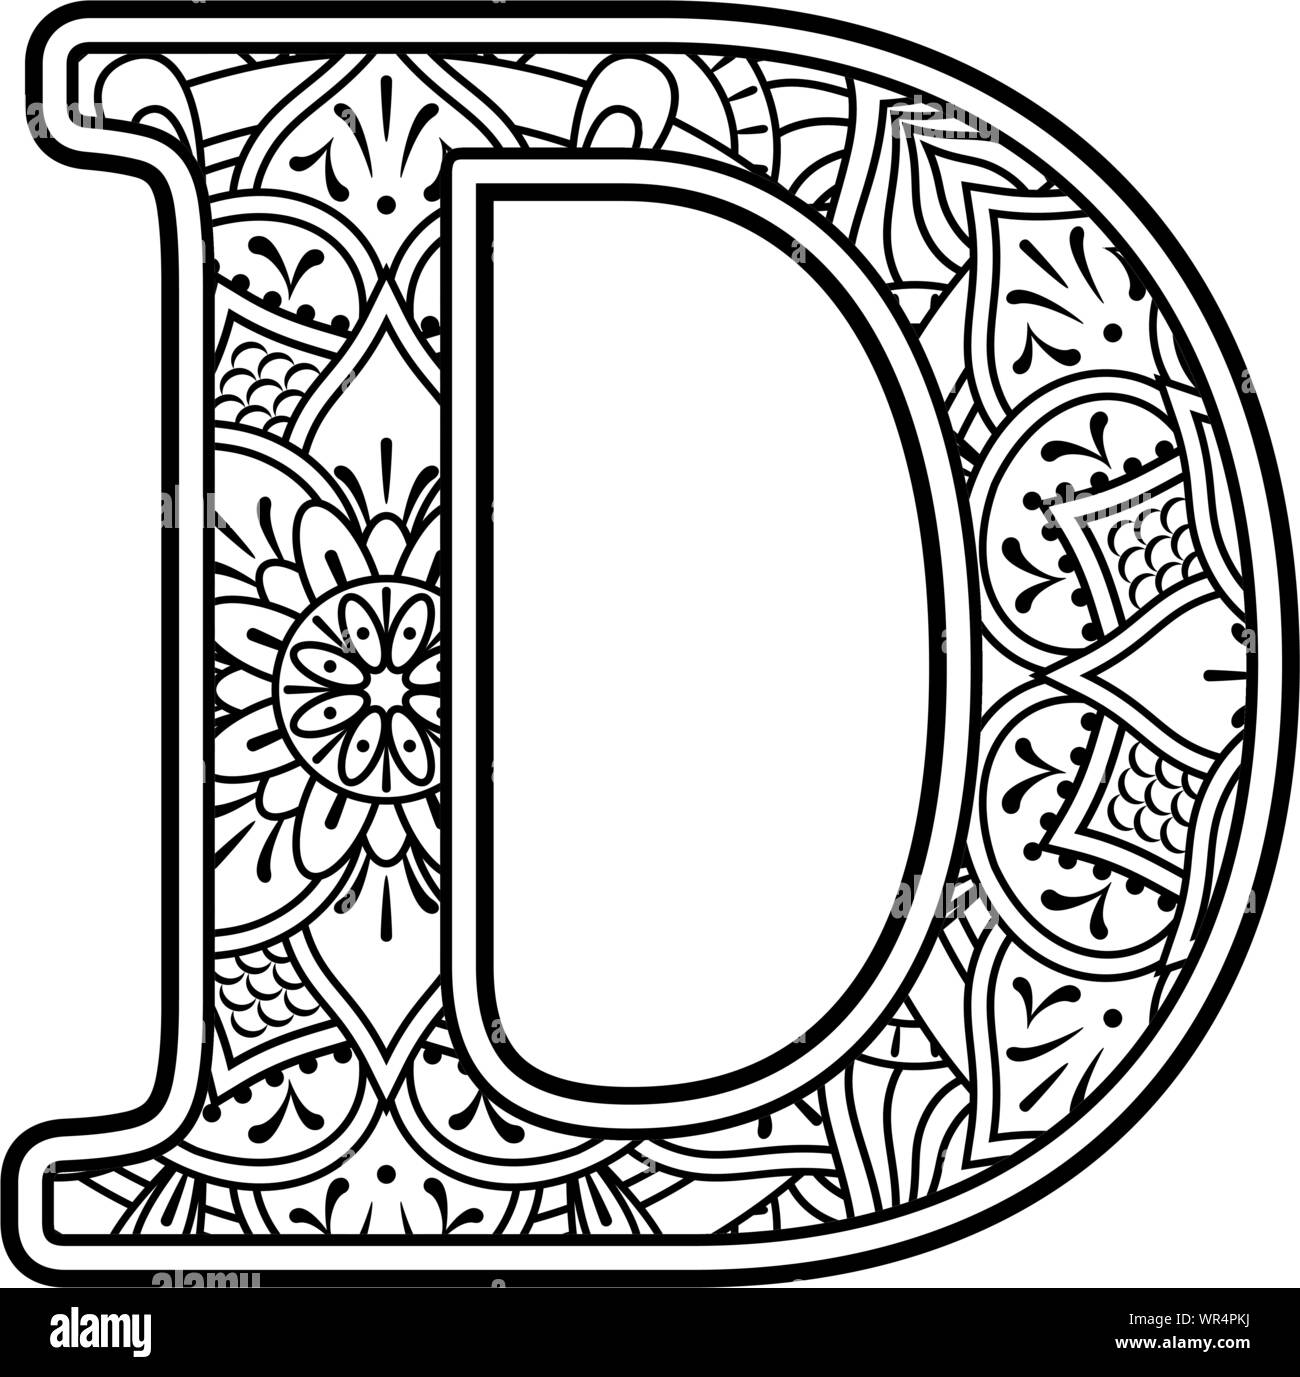 initial d in black and white with doodle ornaments and design elements ...